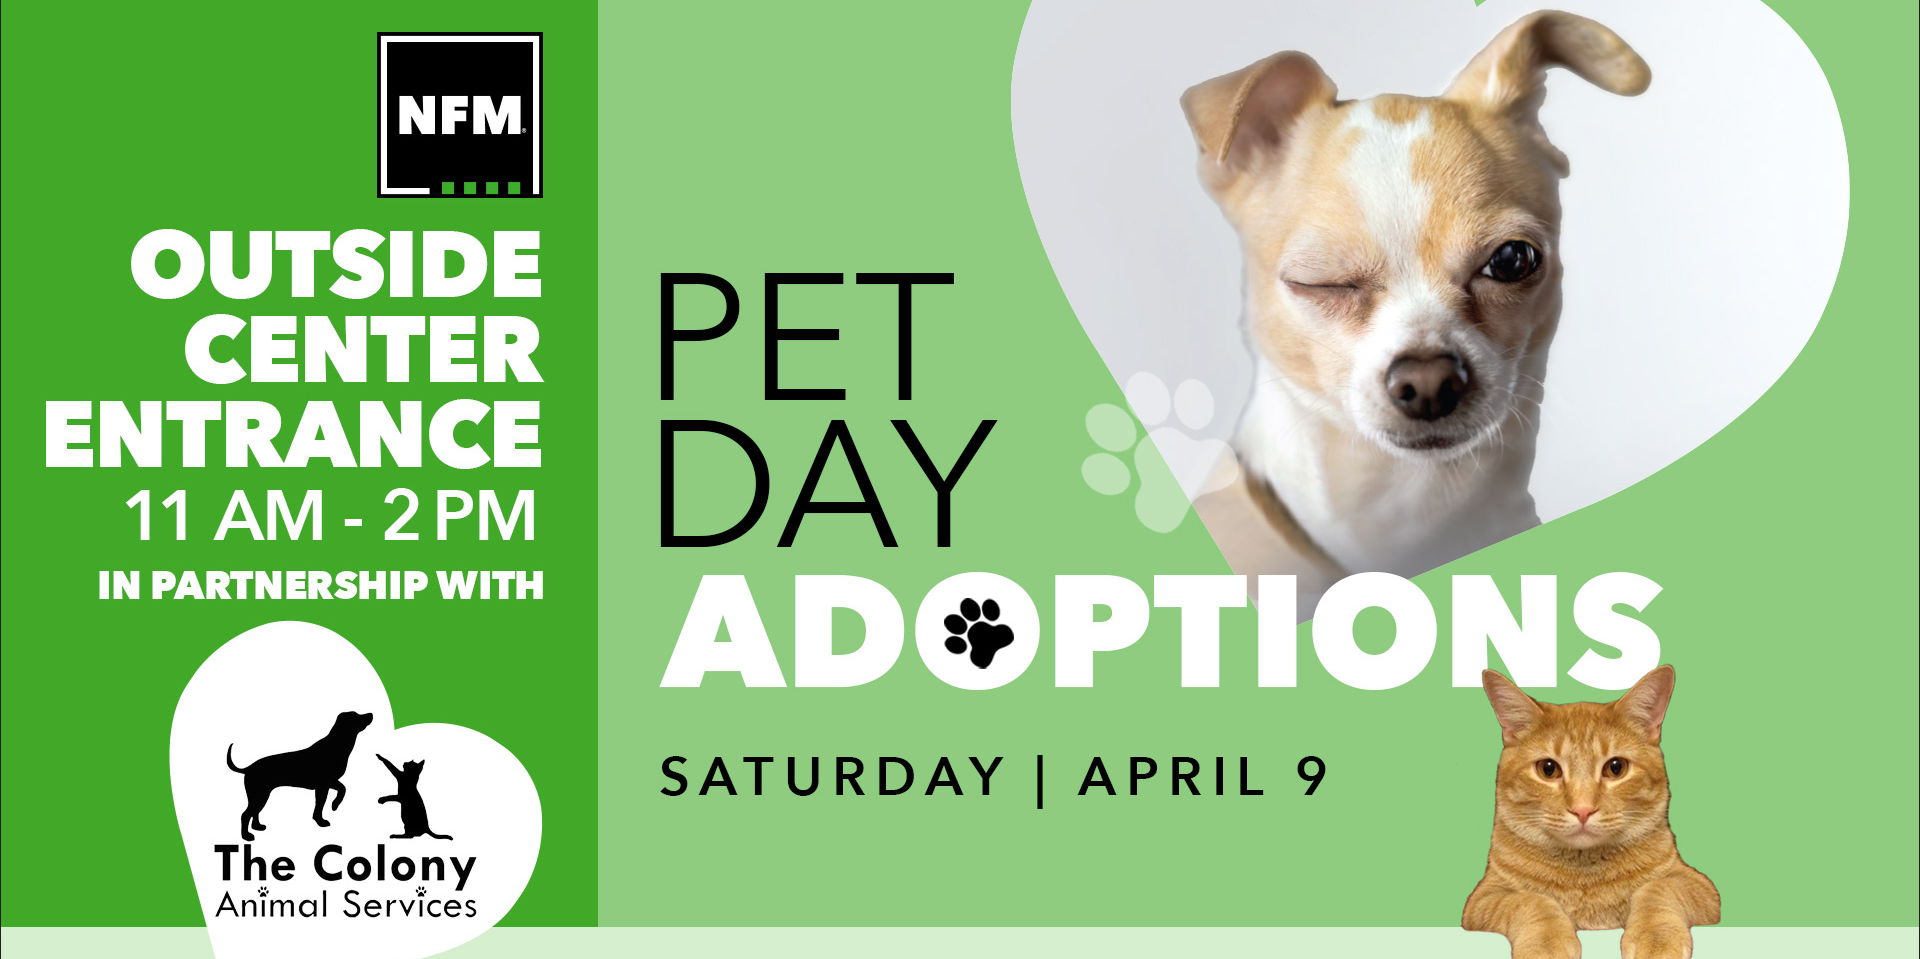 Pet Day Adoption Event promotional image